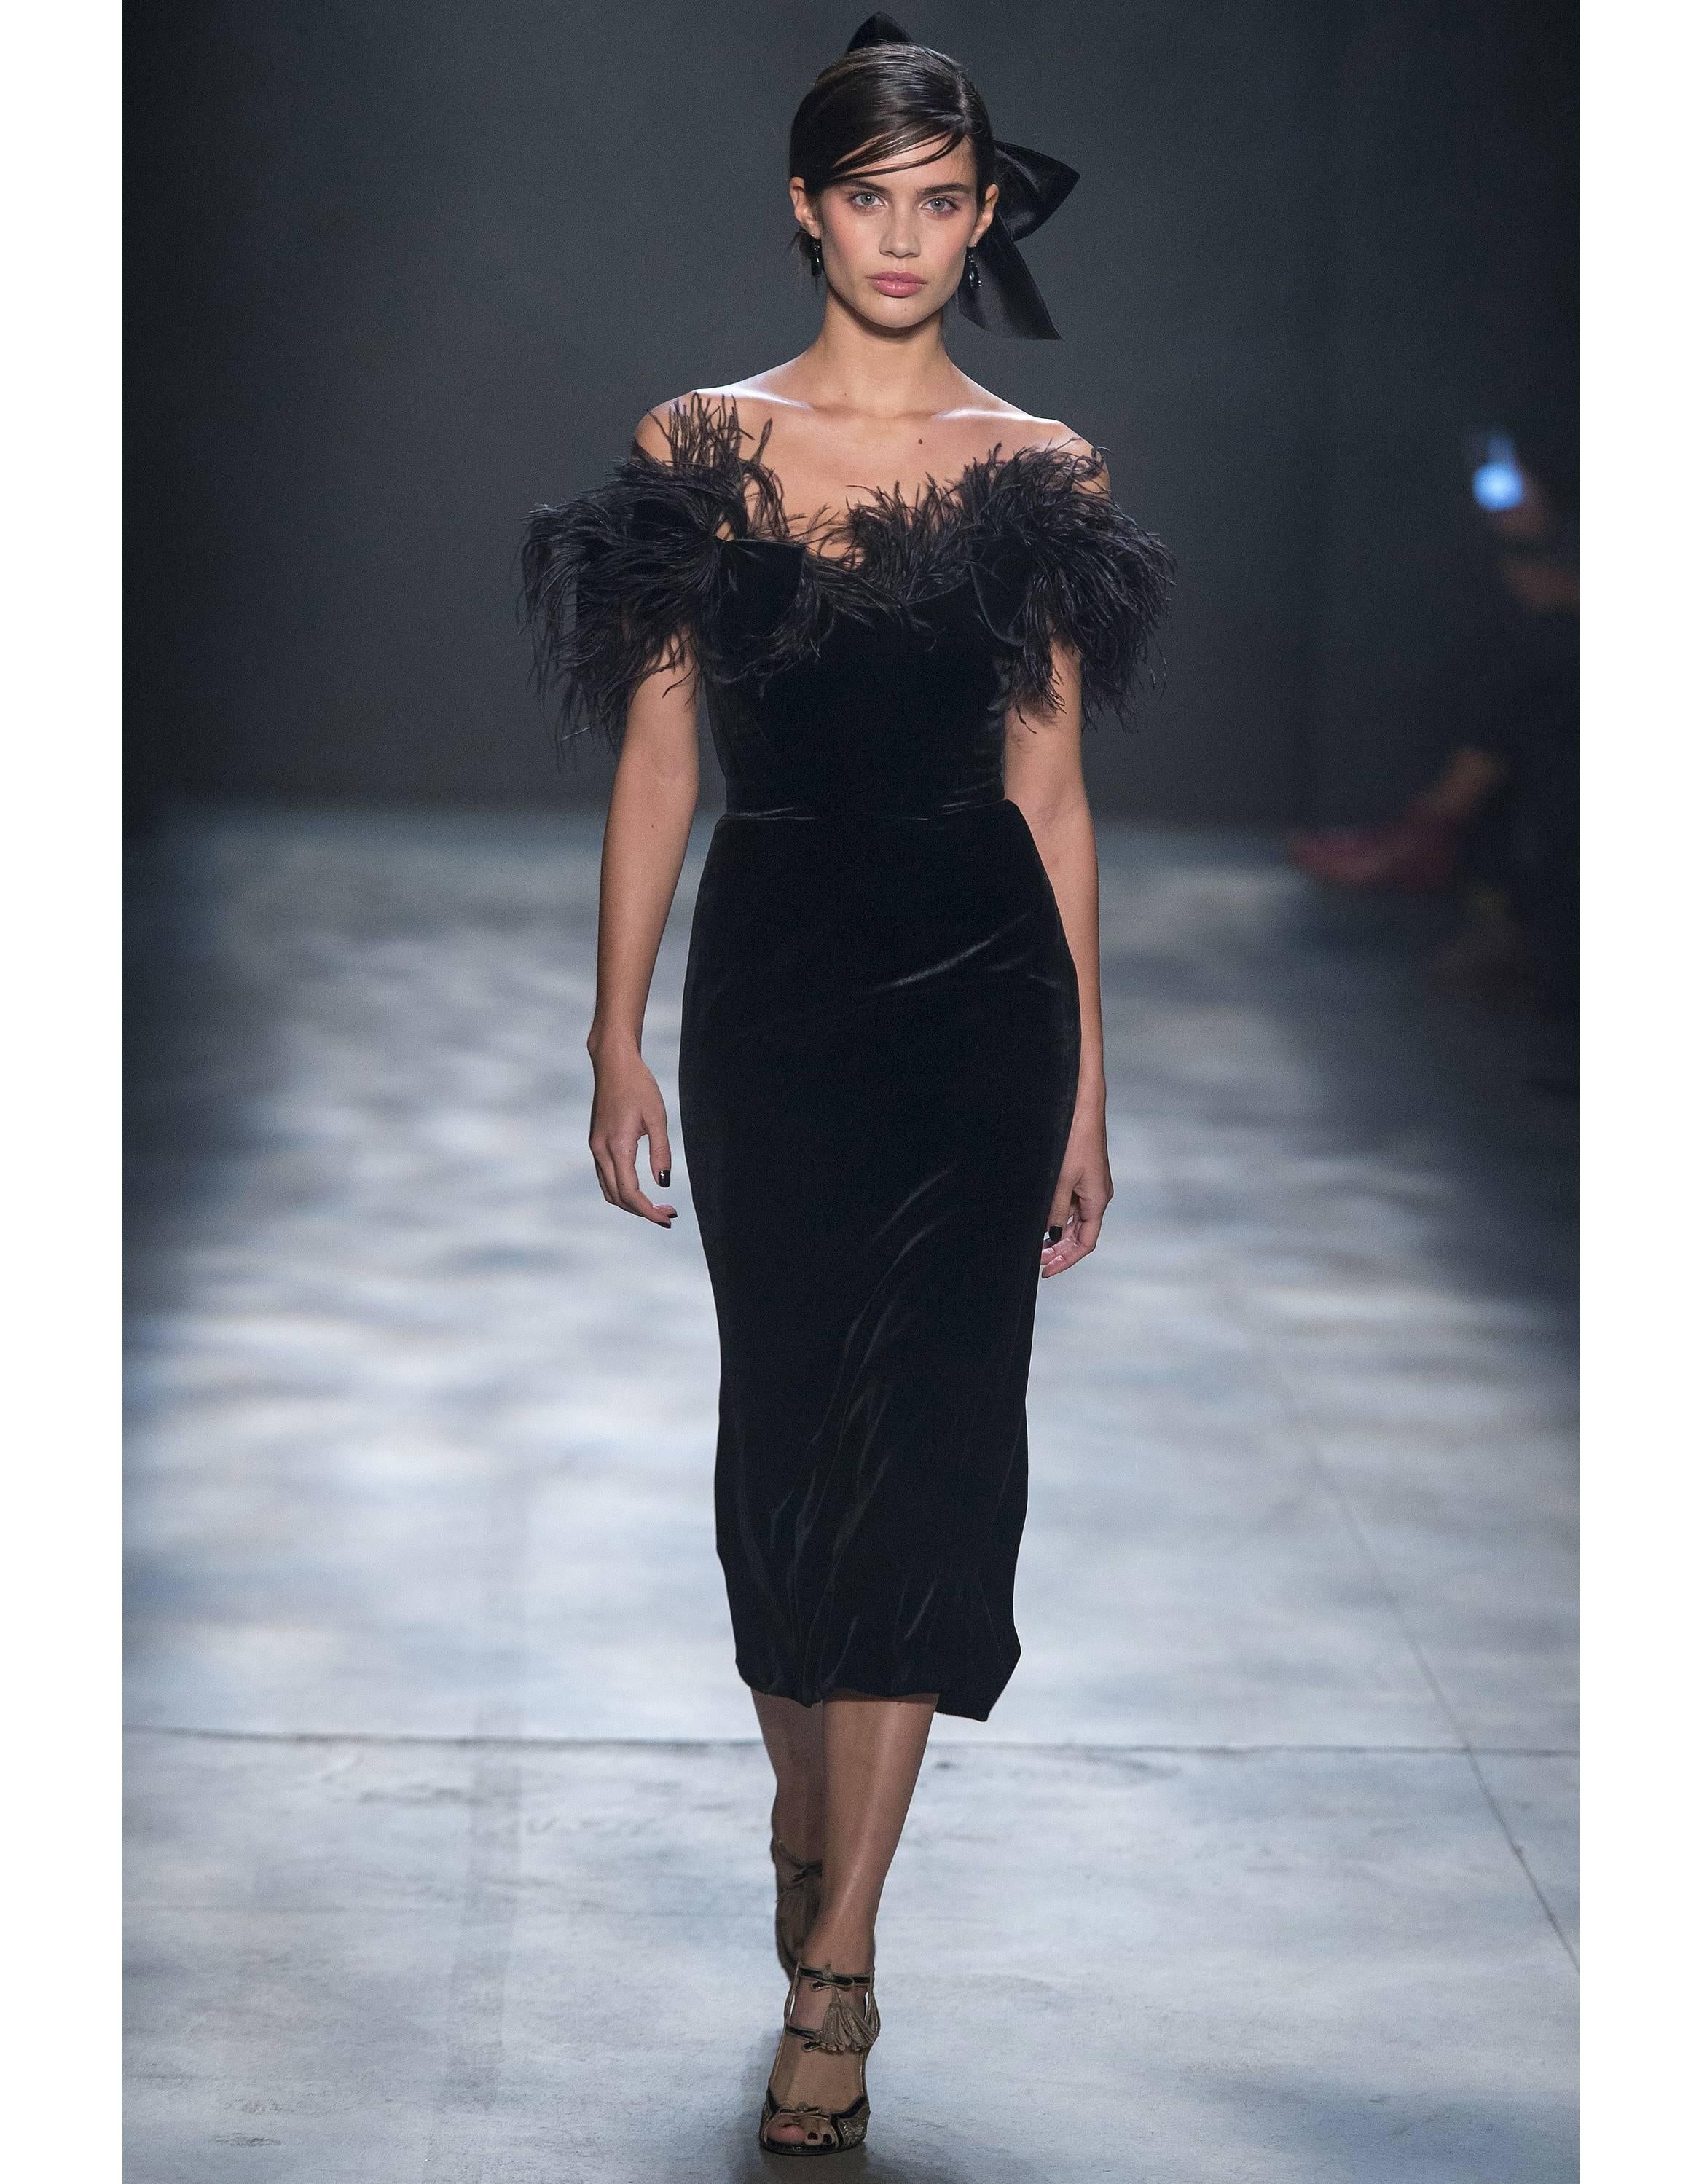 Marchesa Black Velvet Off The Shoulder Evening Dress Sz 8 NWT

Features bow and ostrich feather details along top

Made In: USA
Color: Black
Composition: 80% Viscose, 12% Silk, 8% Spandex
Closure/Opening: Back zip closure
Retail Price: $3,000 +